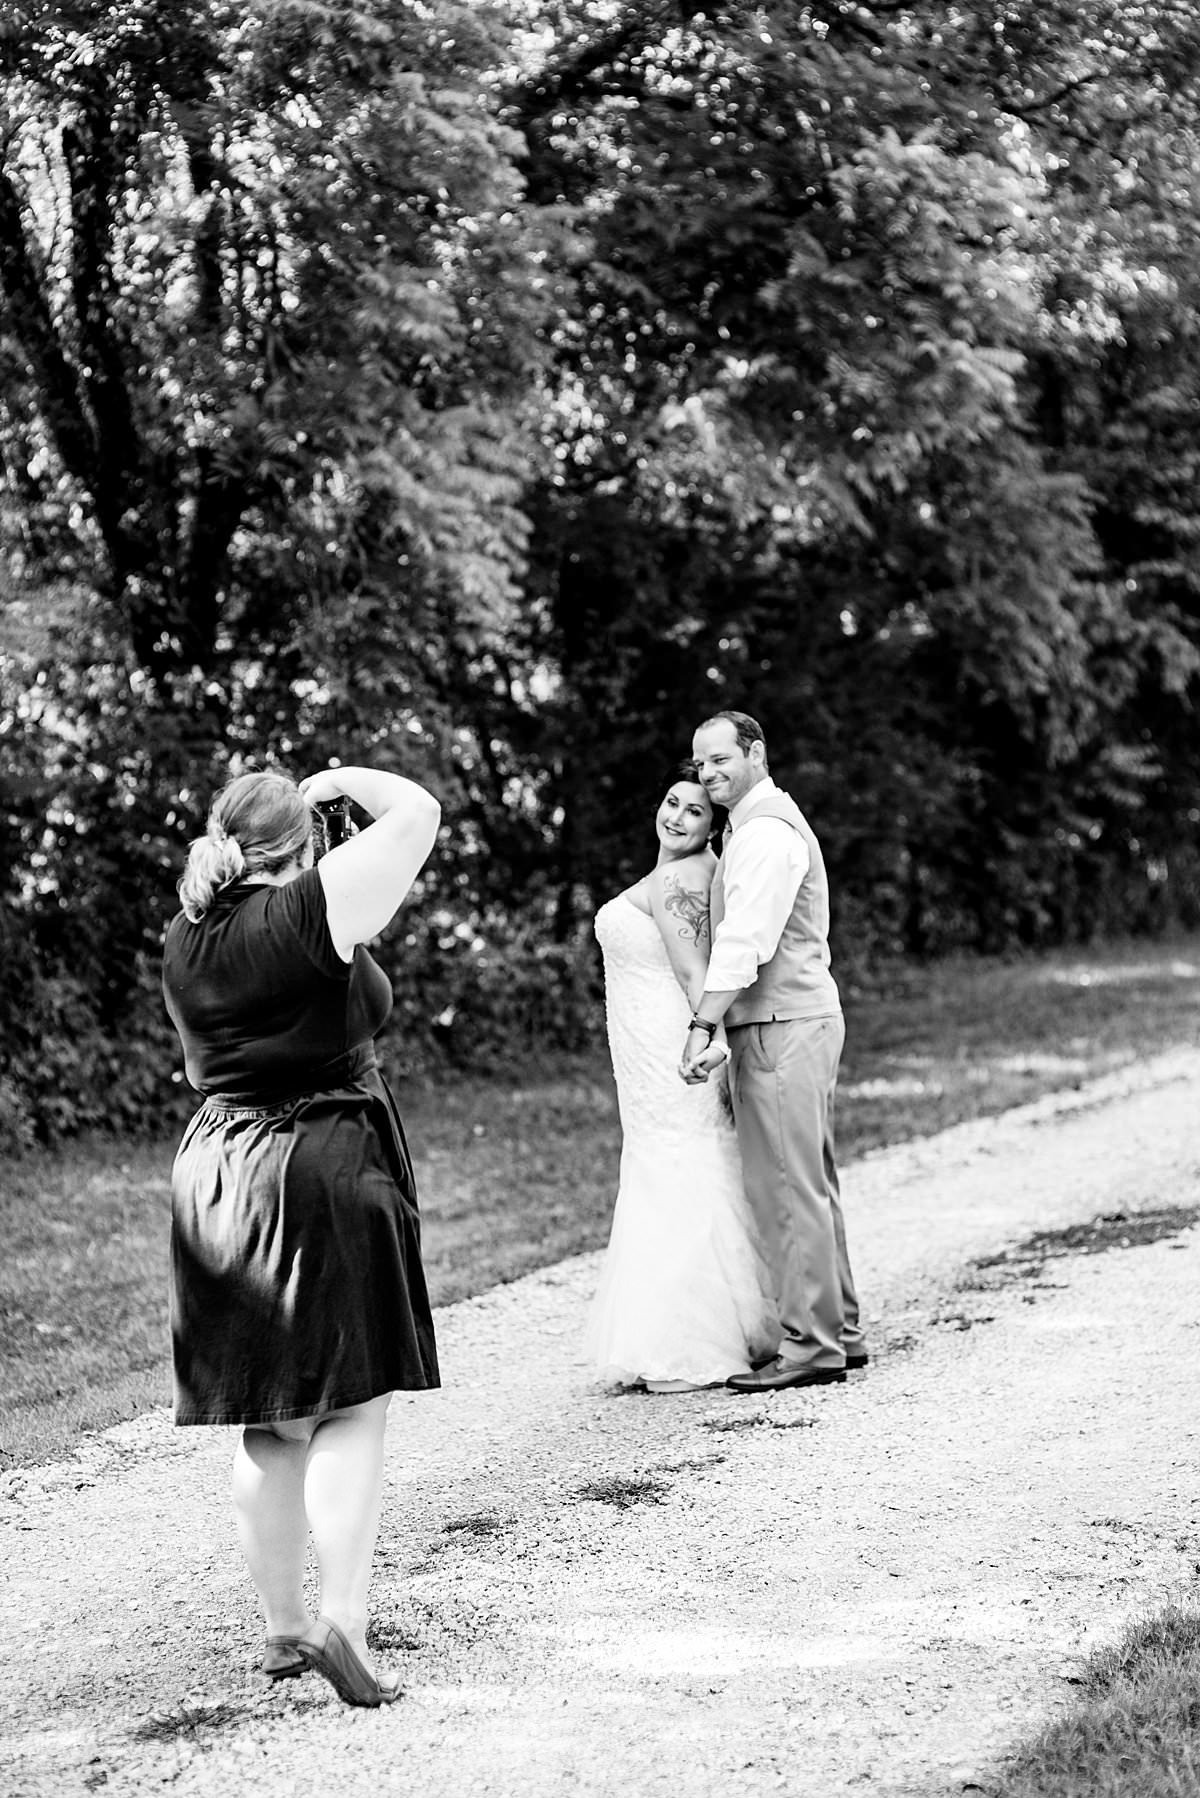 Black and White behind the scenes photo of owner taking photo of bride and groom on gravel road